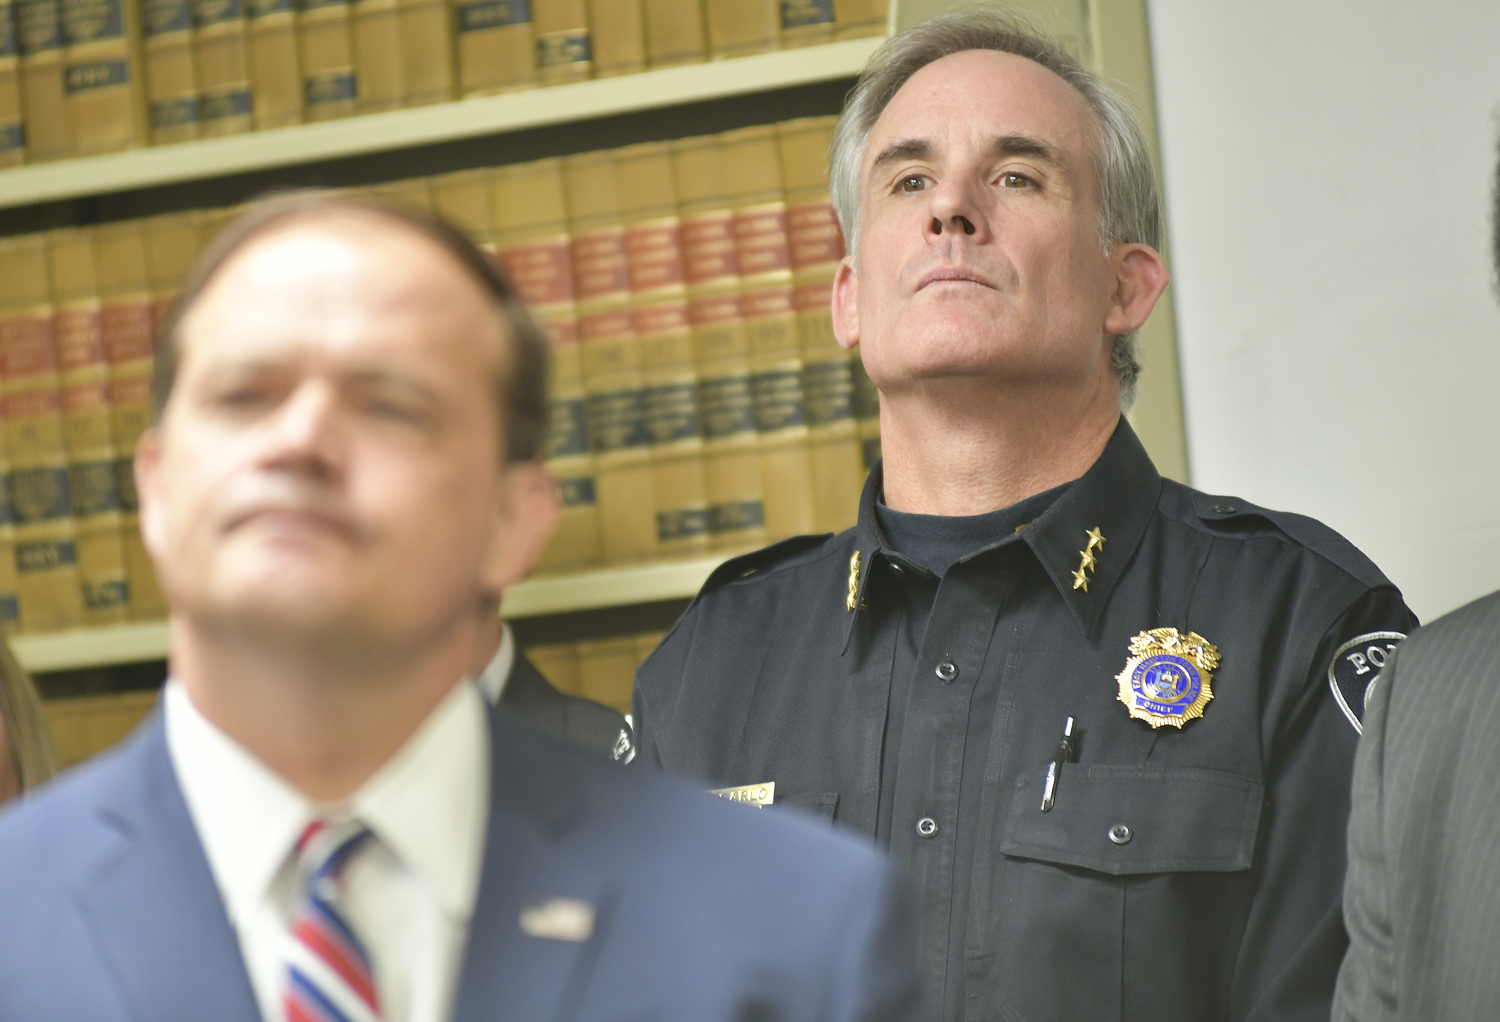 East Hampton Town Police Chief Michael Sarlo at a press conference in Riverhead where District Attorney Ray Tierney, foreground, announces an arrest in the Montauk hate crime graffiti investigation.  DANA SHAW